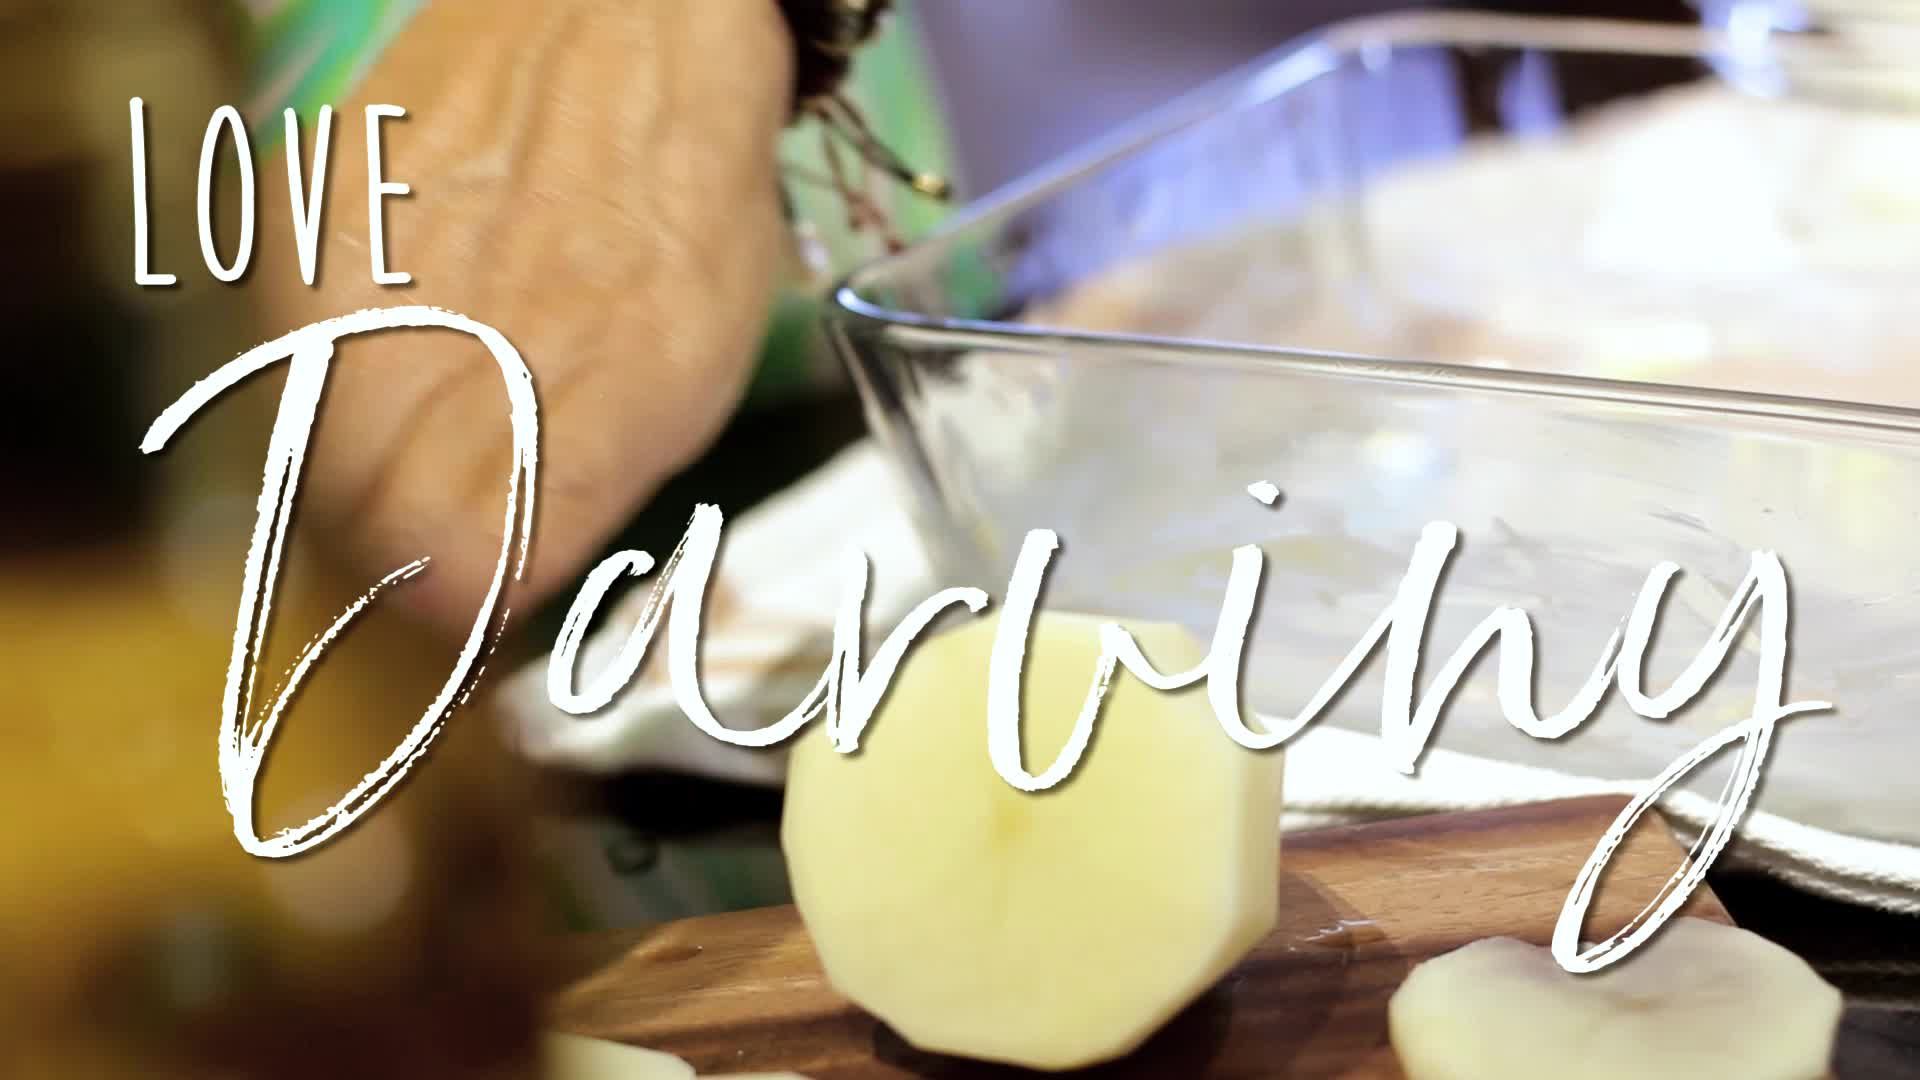 The Love, Darviny Show - How to Cook Like a French Gourmande